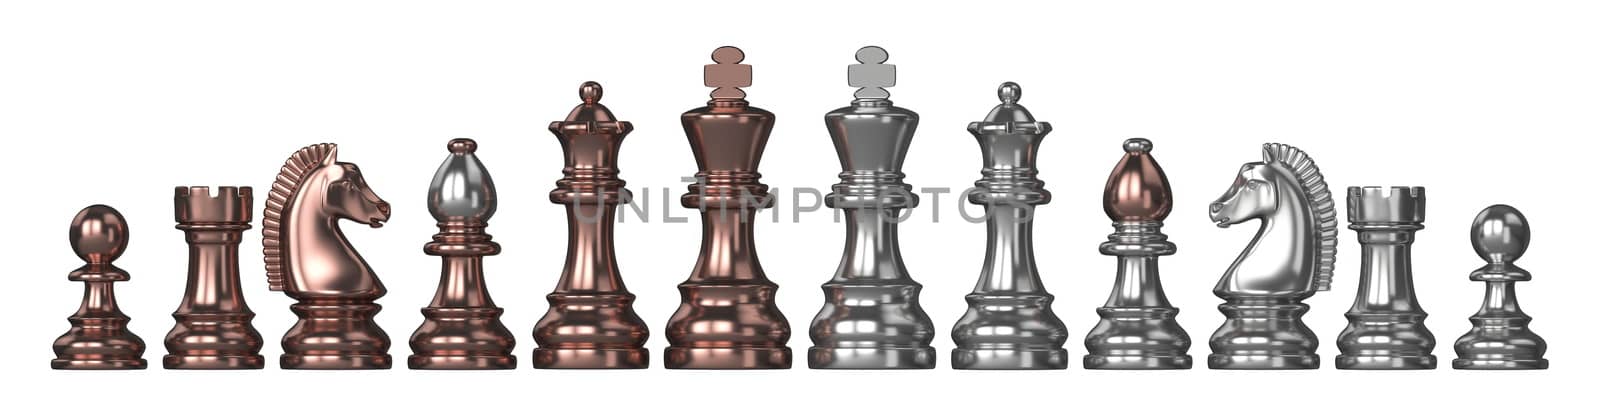 Silver and bronze all chess pieces 3D rendering illustration isolated on white background